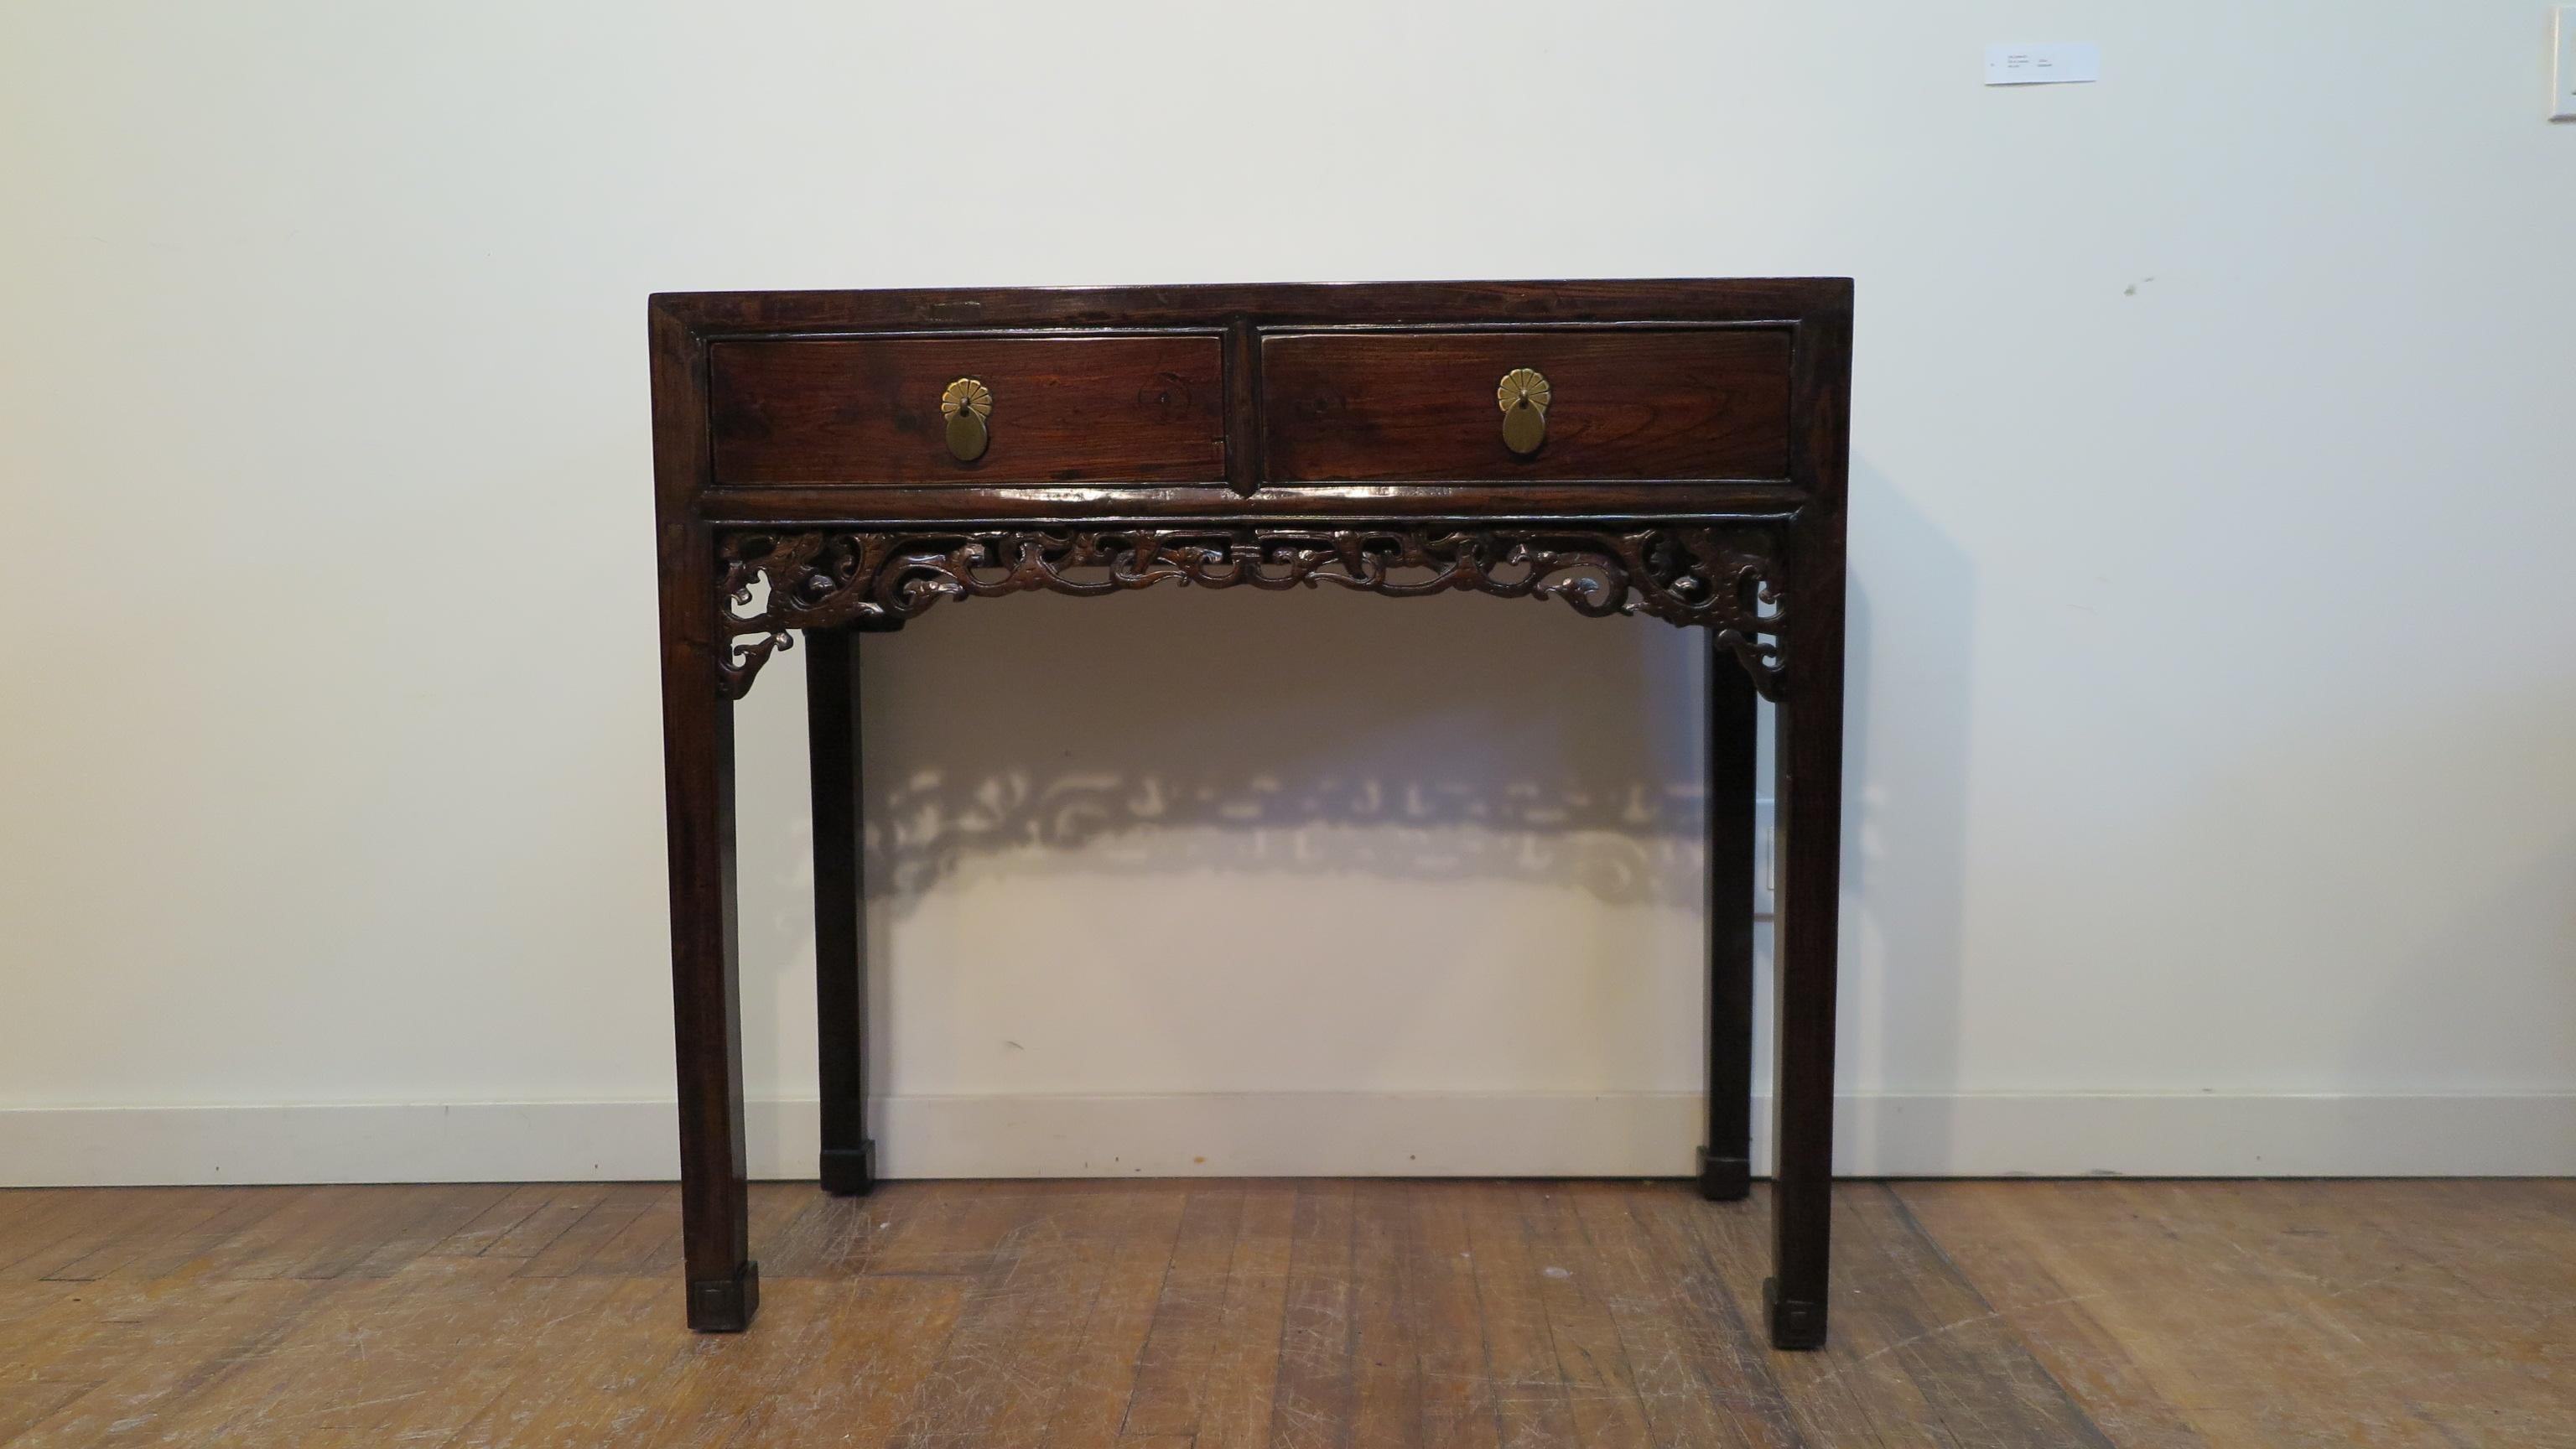 19th century Chinese console table late Qing Dynasty. Elm wood with traditional joinery and lacquered finish.  Emphasizing the tables refinement are two drawers with carved detail apron, brass drawer pulls, and legs terminating to block carved